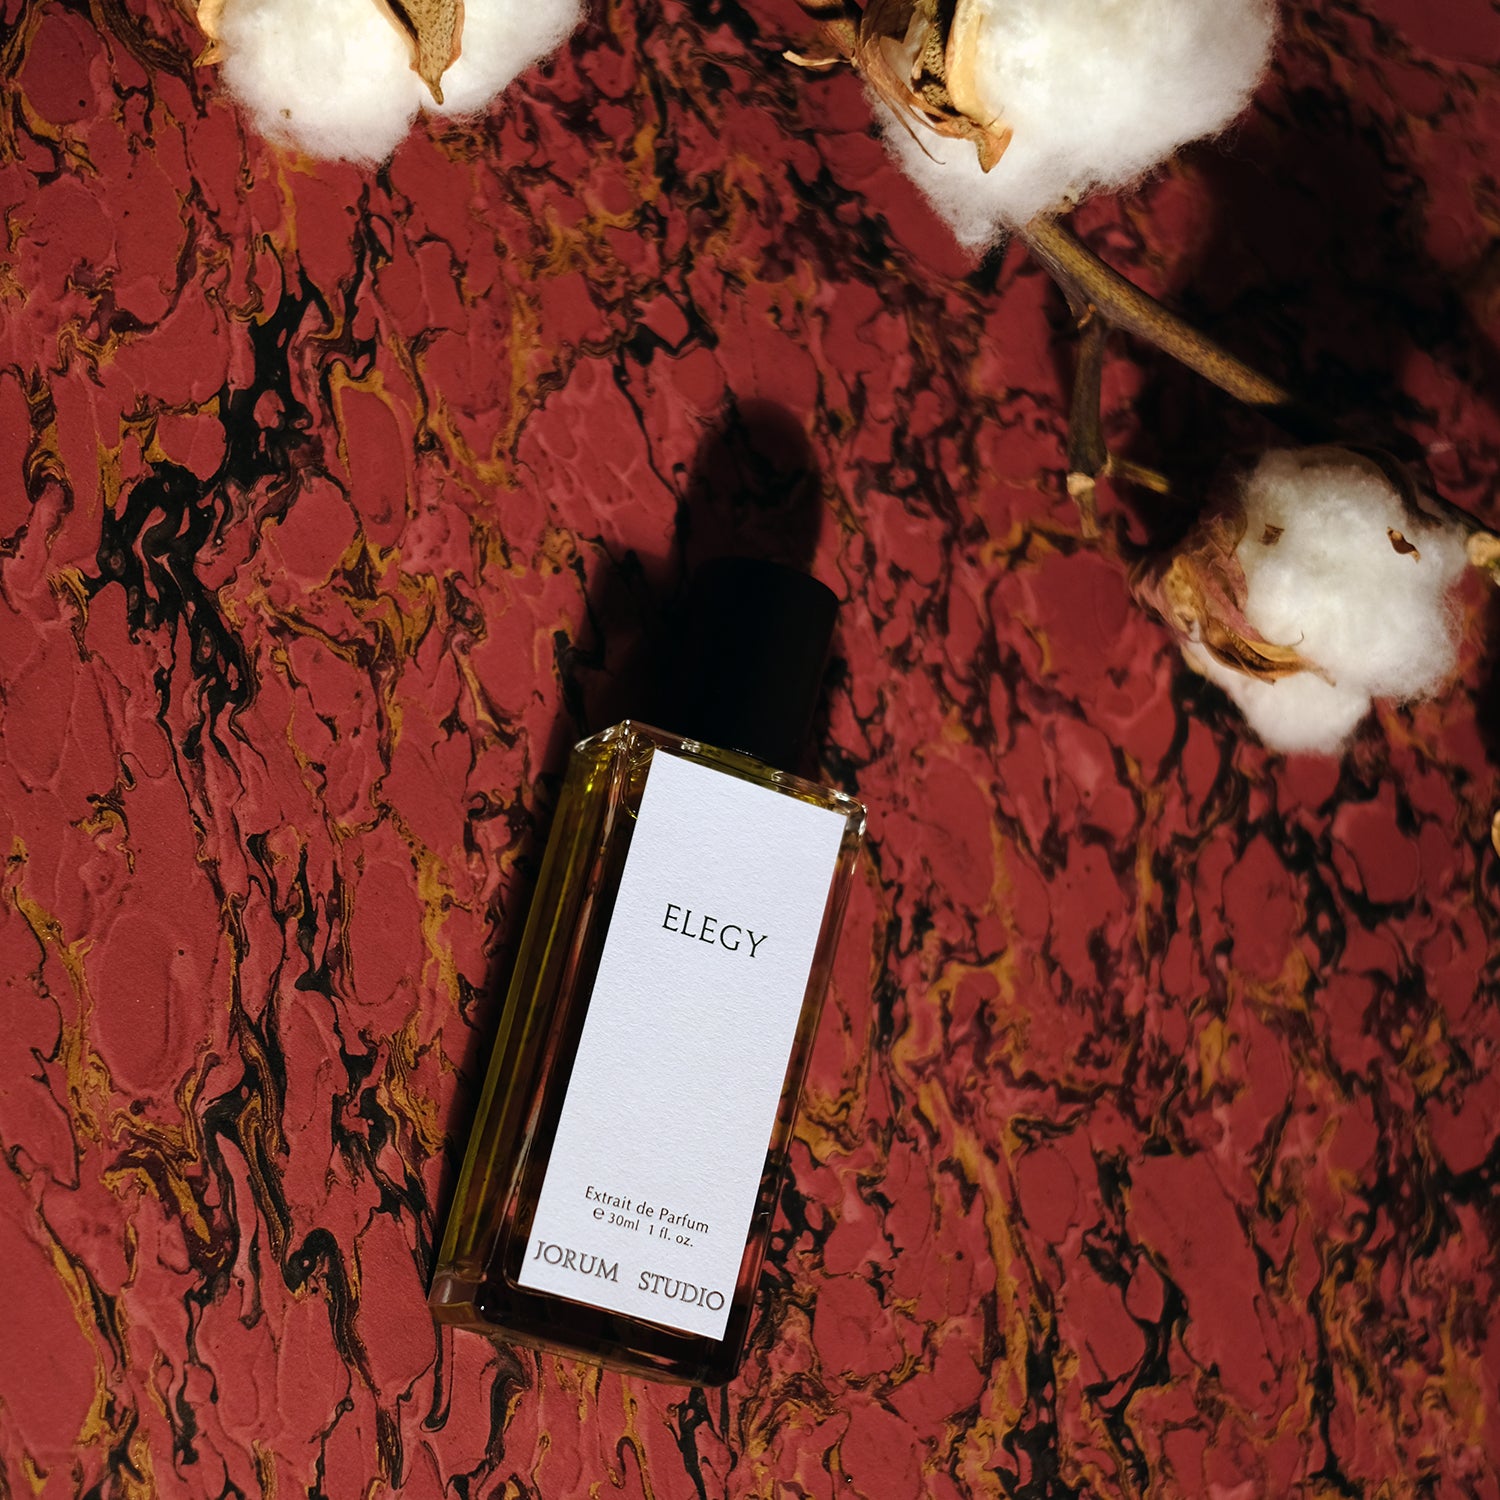 Bottle of Jorum Studio Elegy perfume with cotton flowers and red marble background